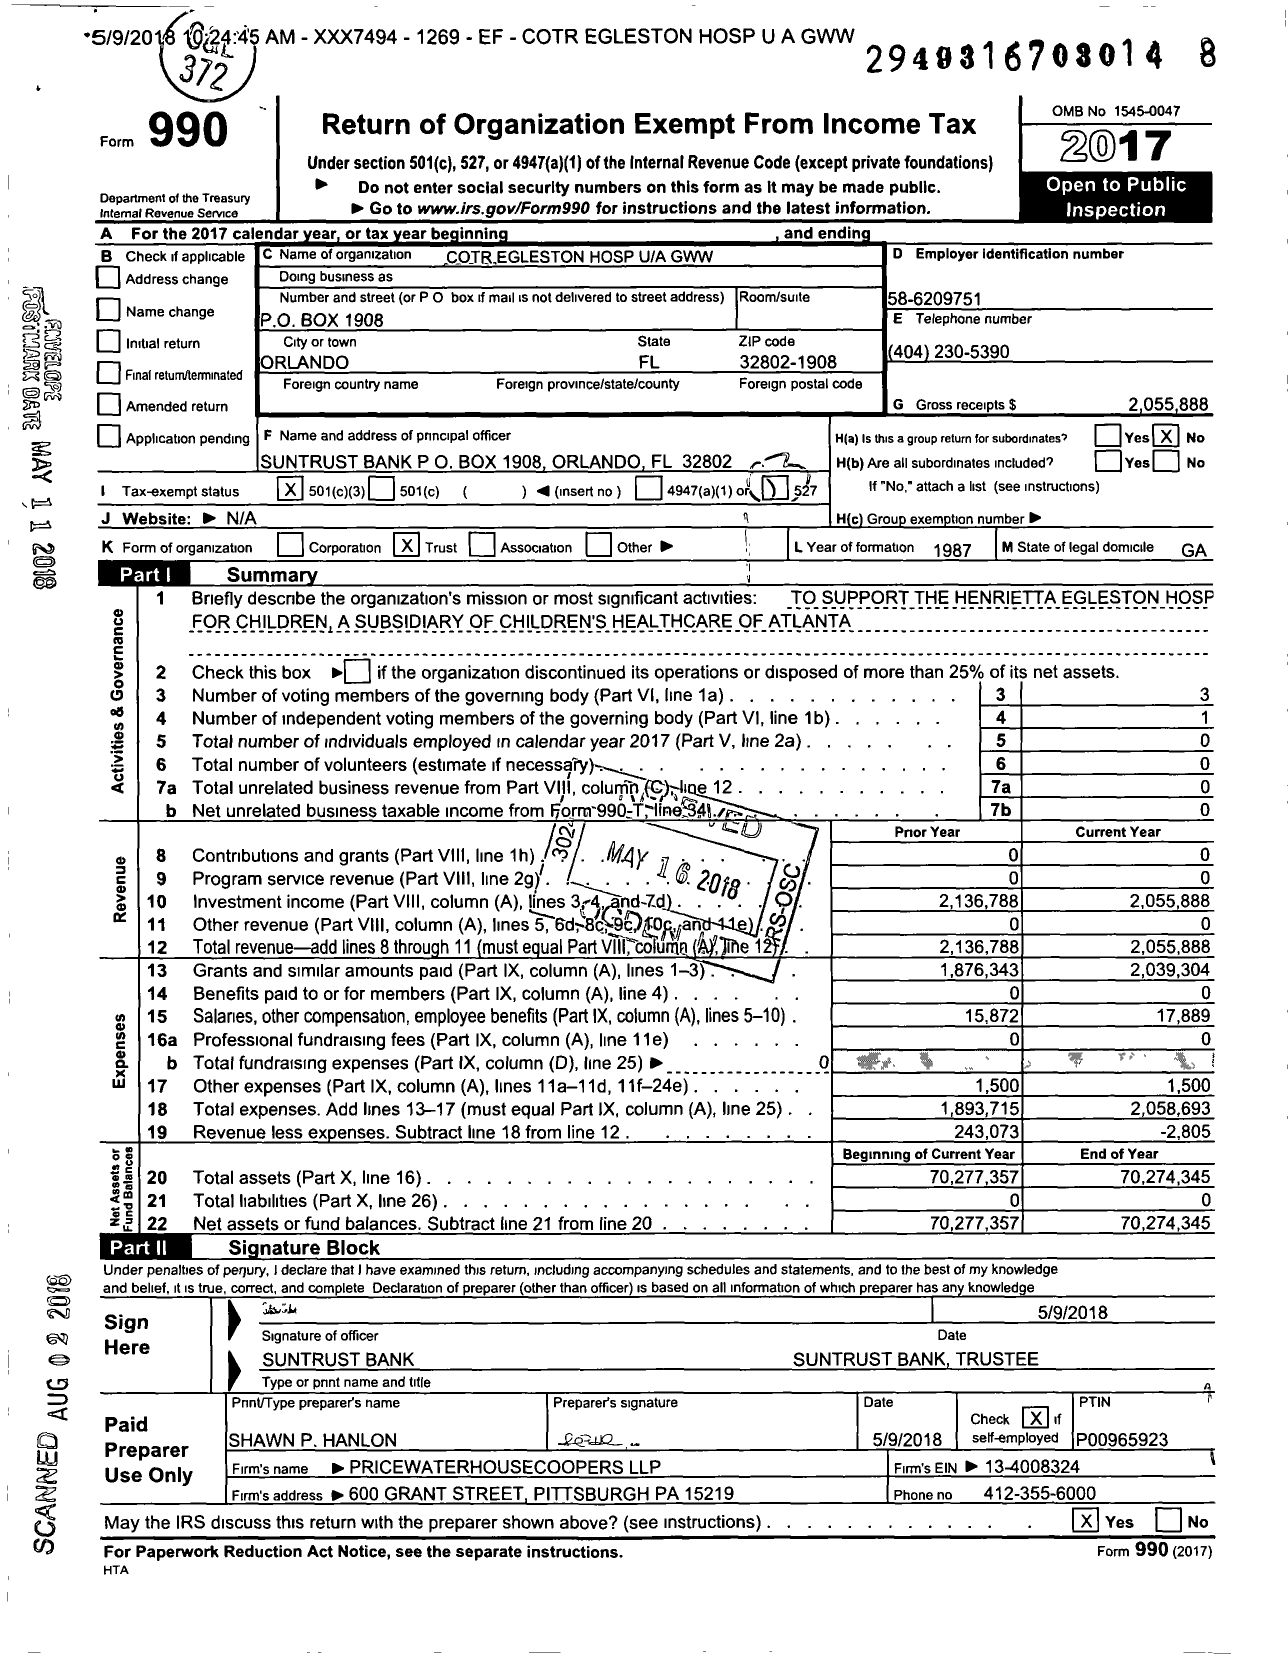 Image of first page of 2017 Form 990 for Cotr Egleston Hospital GWW